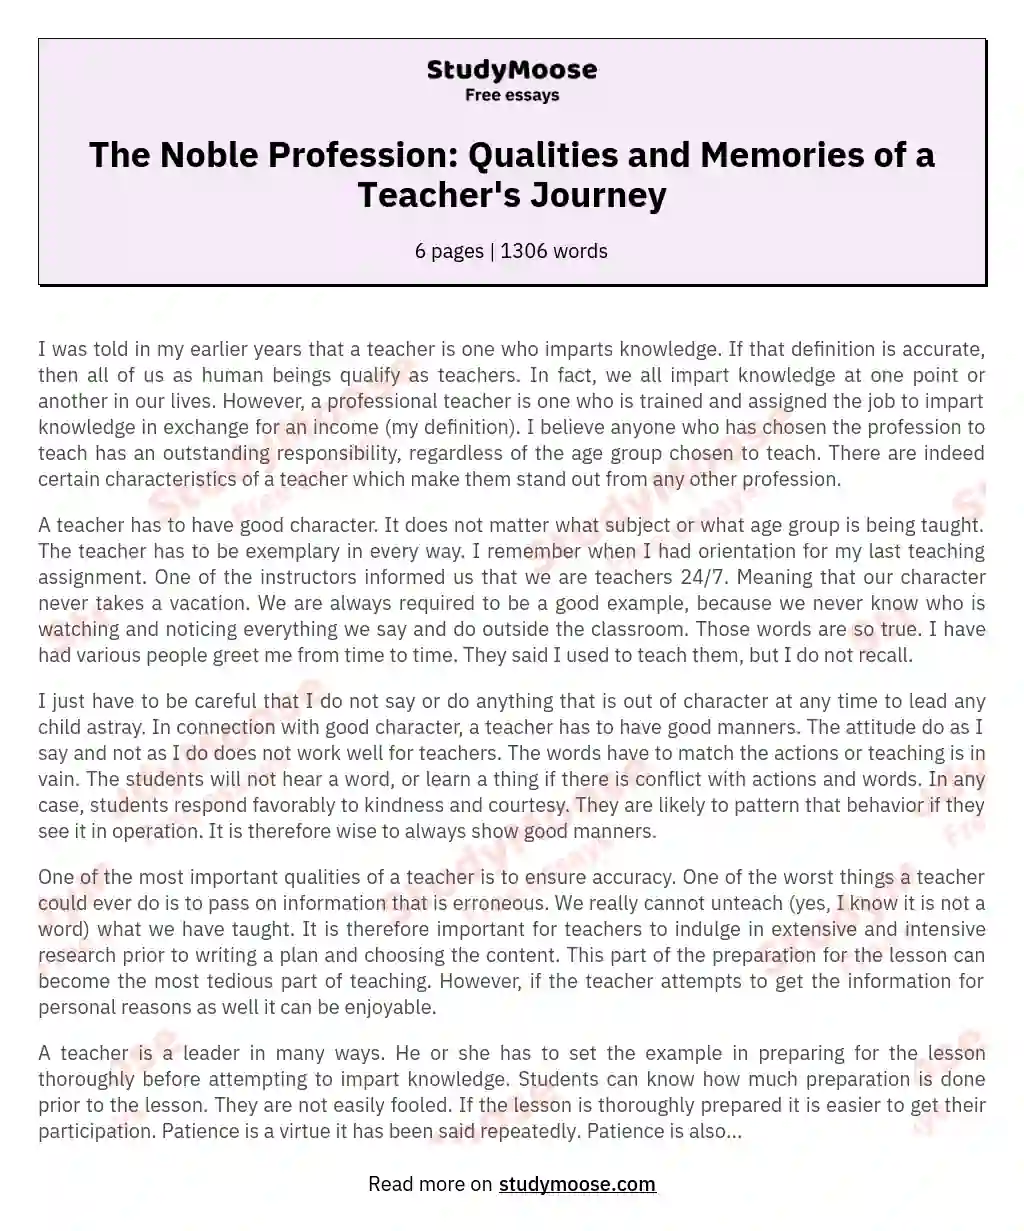 The Noble Profession: Qualities and Memories of a Teacher's Journey essay